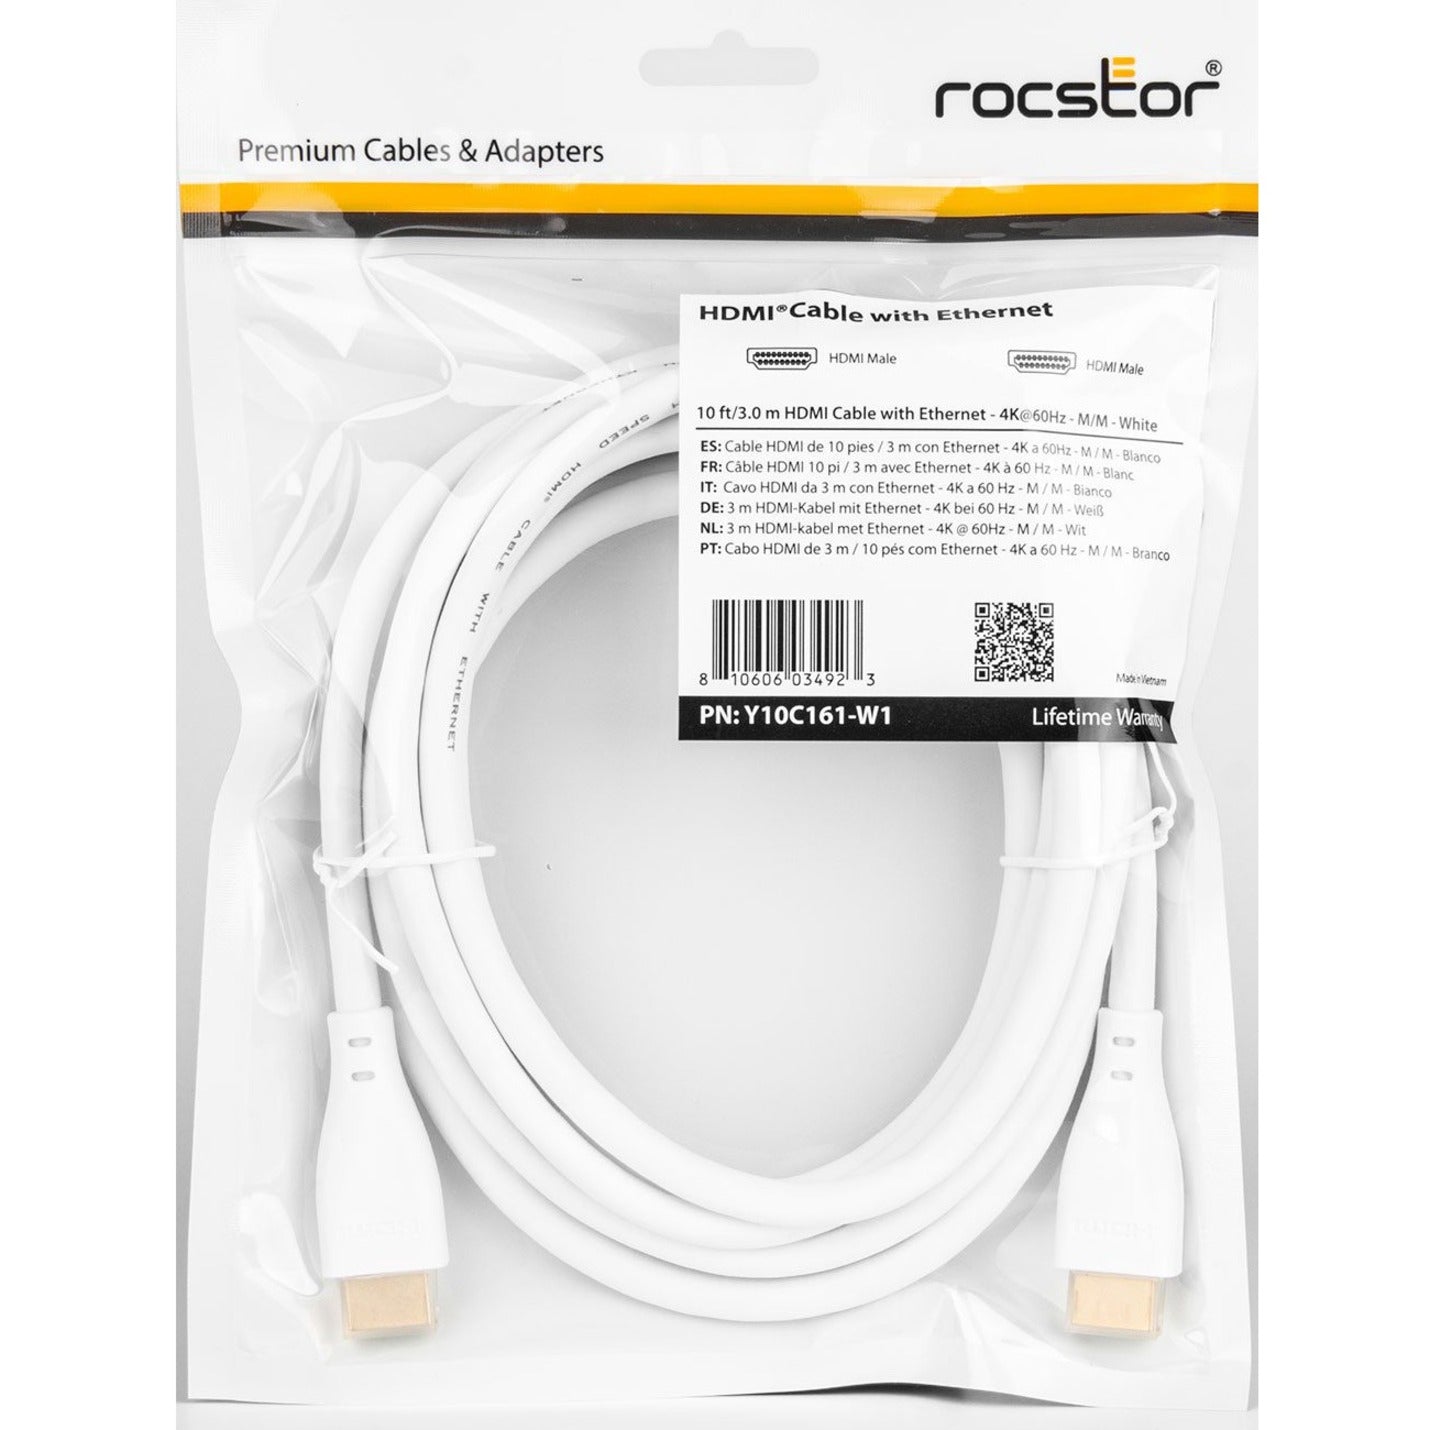 Rocstor Y10C161-W1 Premium HDMI Cable with Ethernet - 4K/60Hz, 10 ft, Gold Plated, Lifetime Warranty